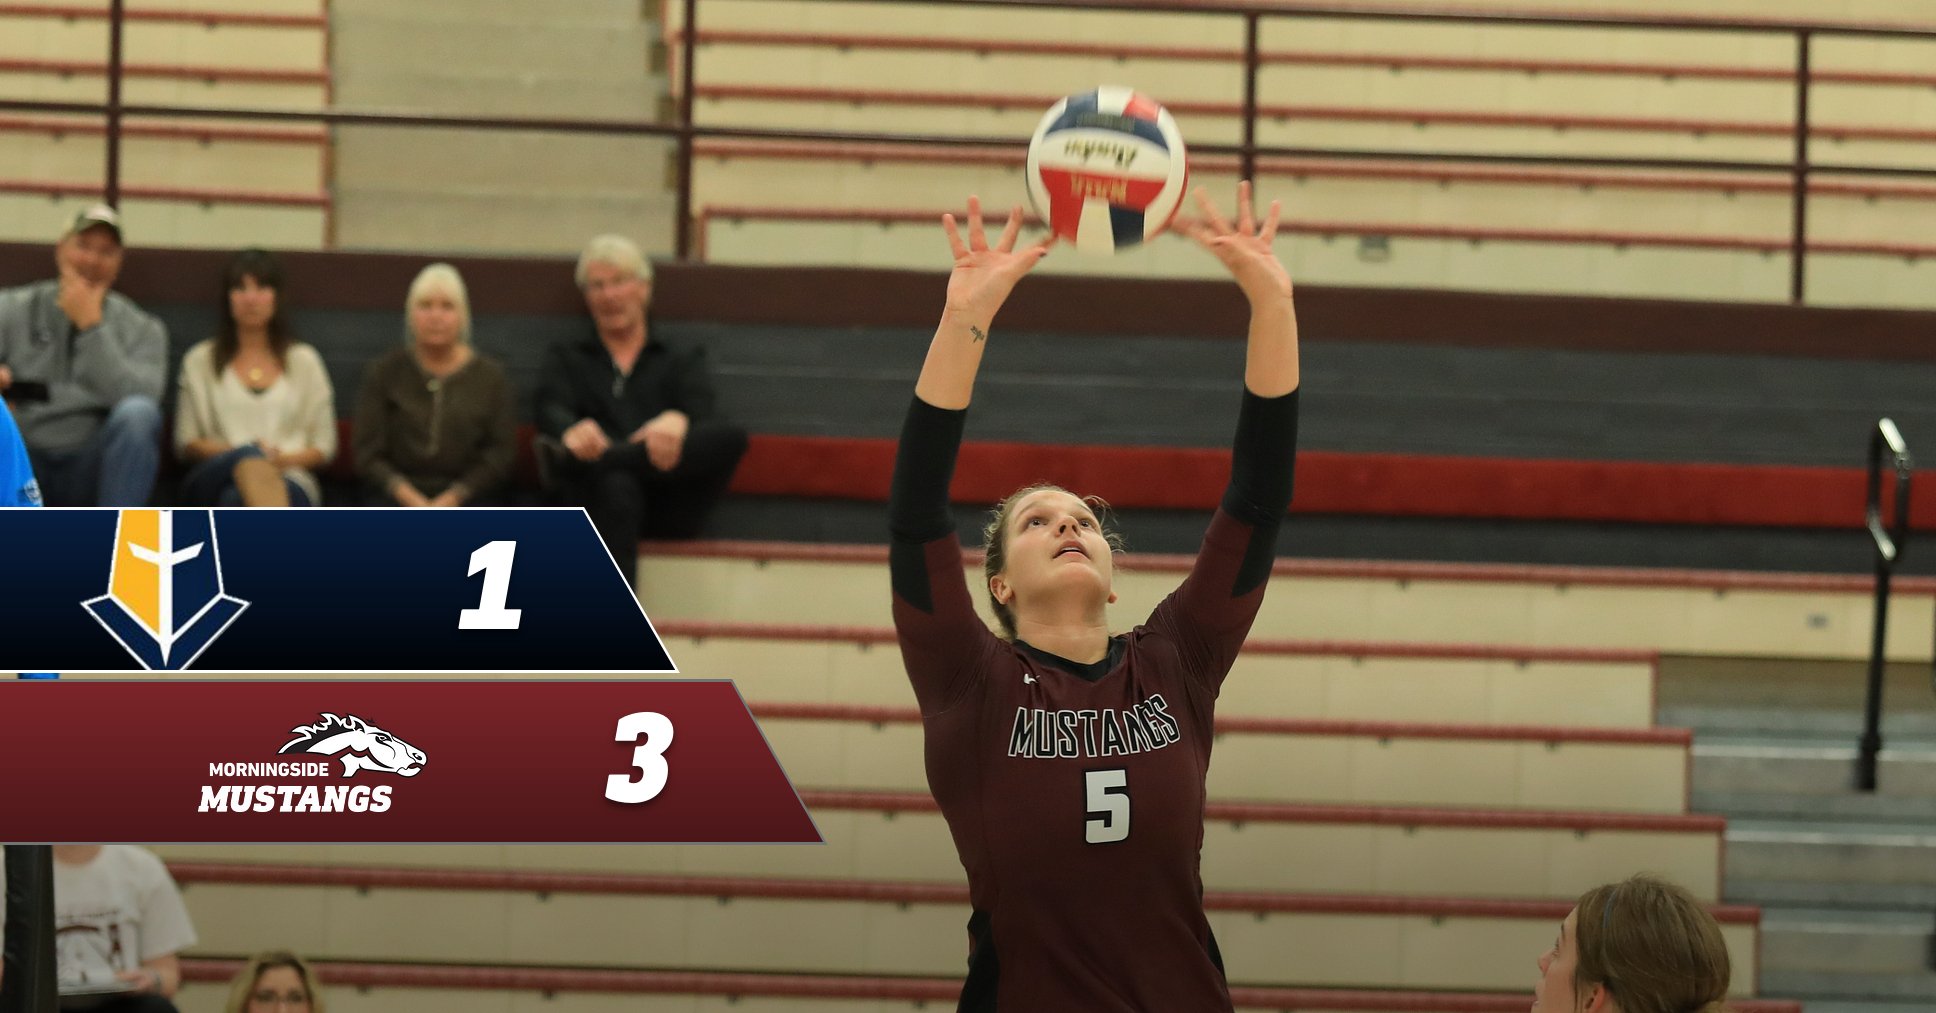 Morningside defeats Mount Marty 3-1 to open homecoming weekend